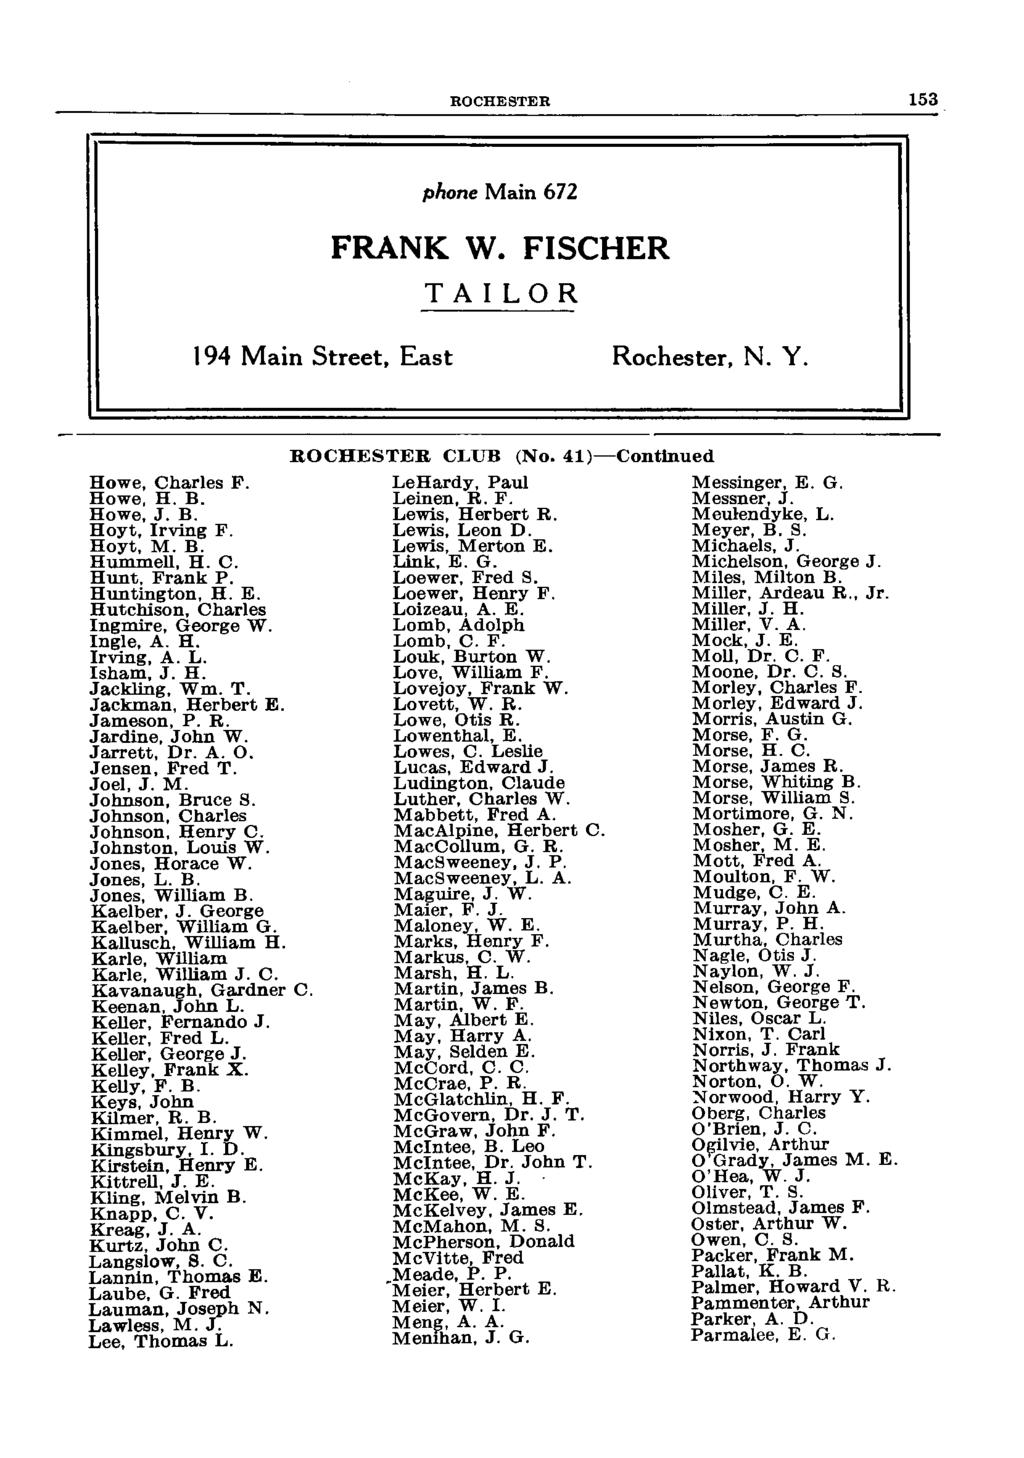 ROCHESTER phone Main 672 FRANK W. FISCHER TAILOR 194 Main Street, East Rochester, N. Y. Howe, Charles F. Howe, H. B. Howe, J. B. Hoyt, Irving F. Hoyt, M. B. Hummell, H. C. Hunt. Frank P.